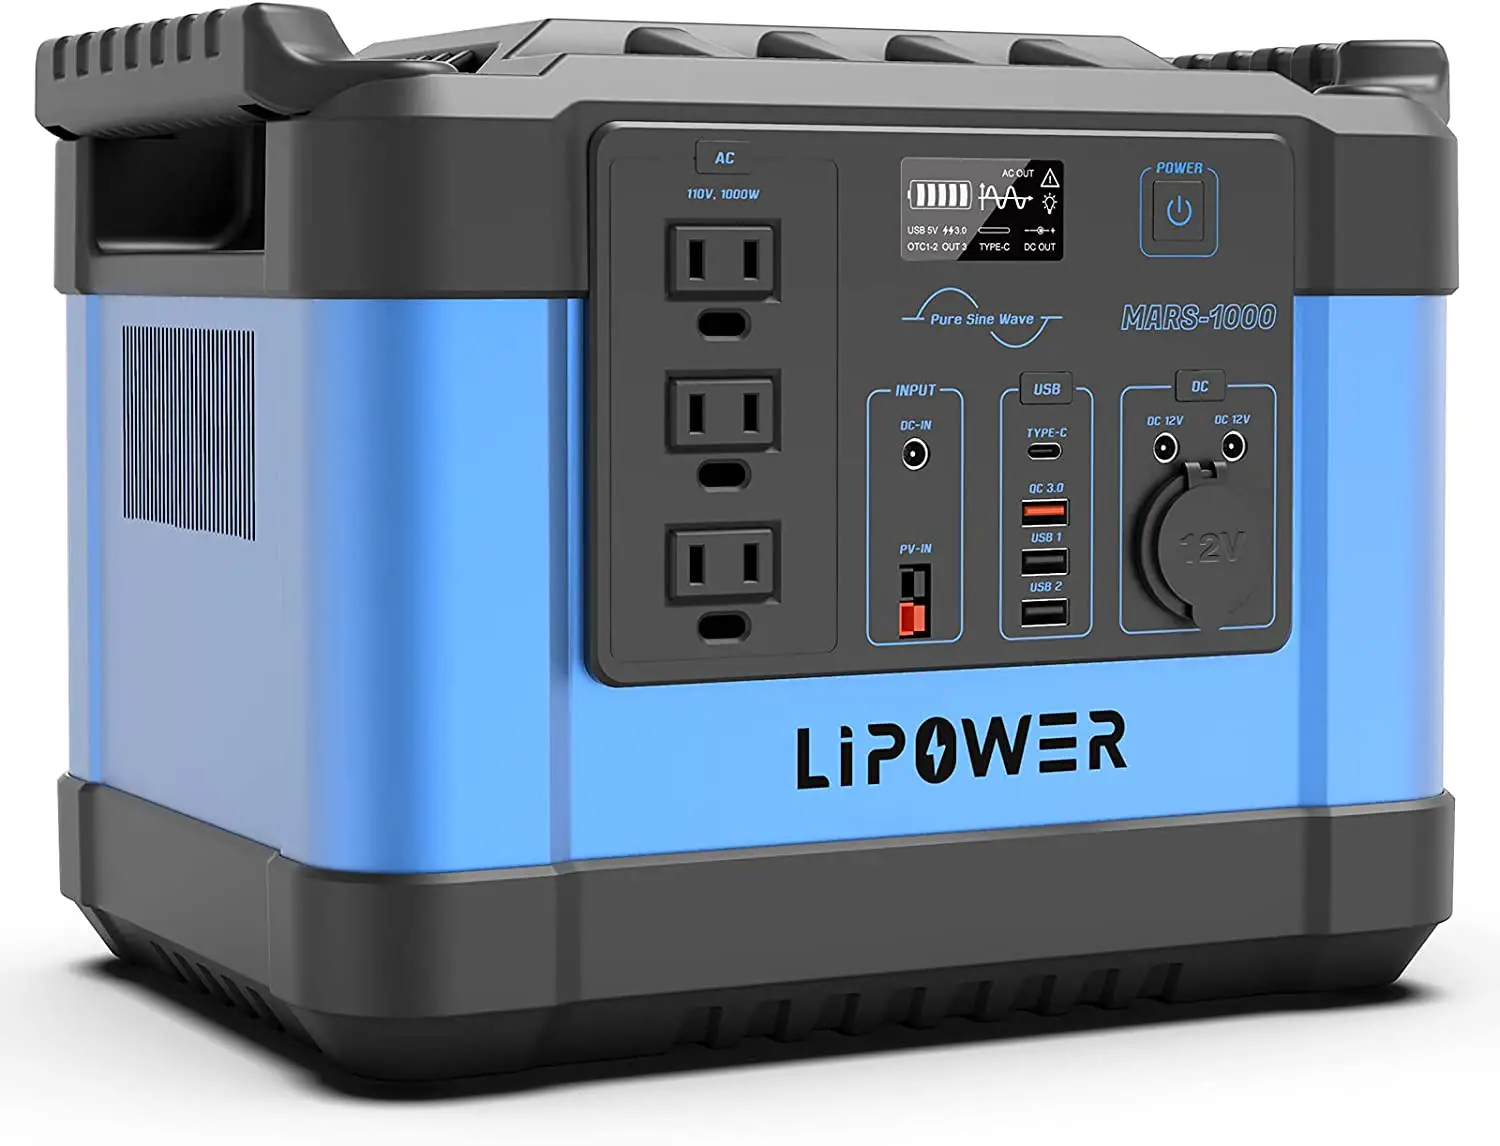 LIPOWER Solar Generator Backup PROS and CONS